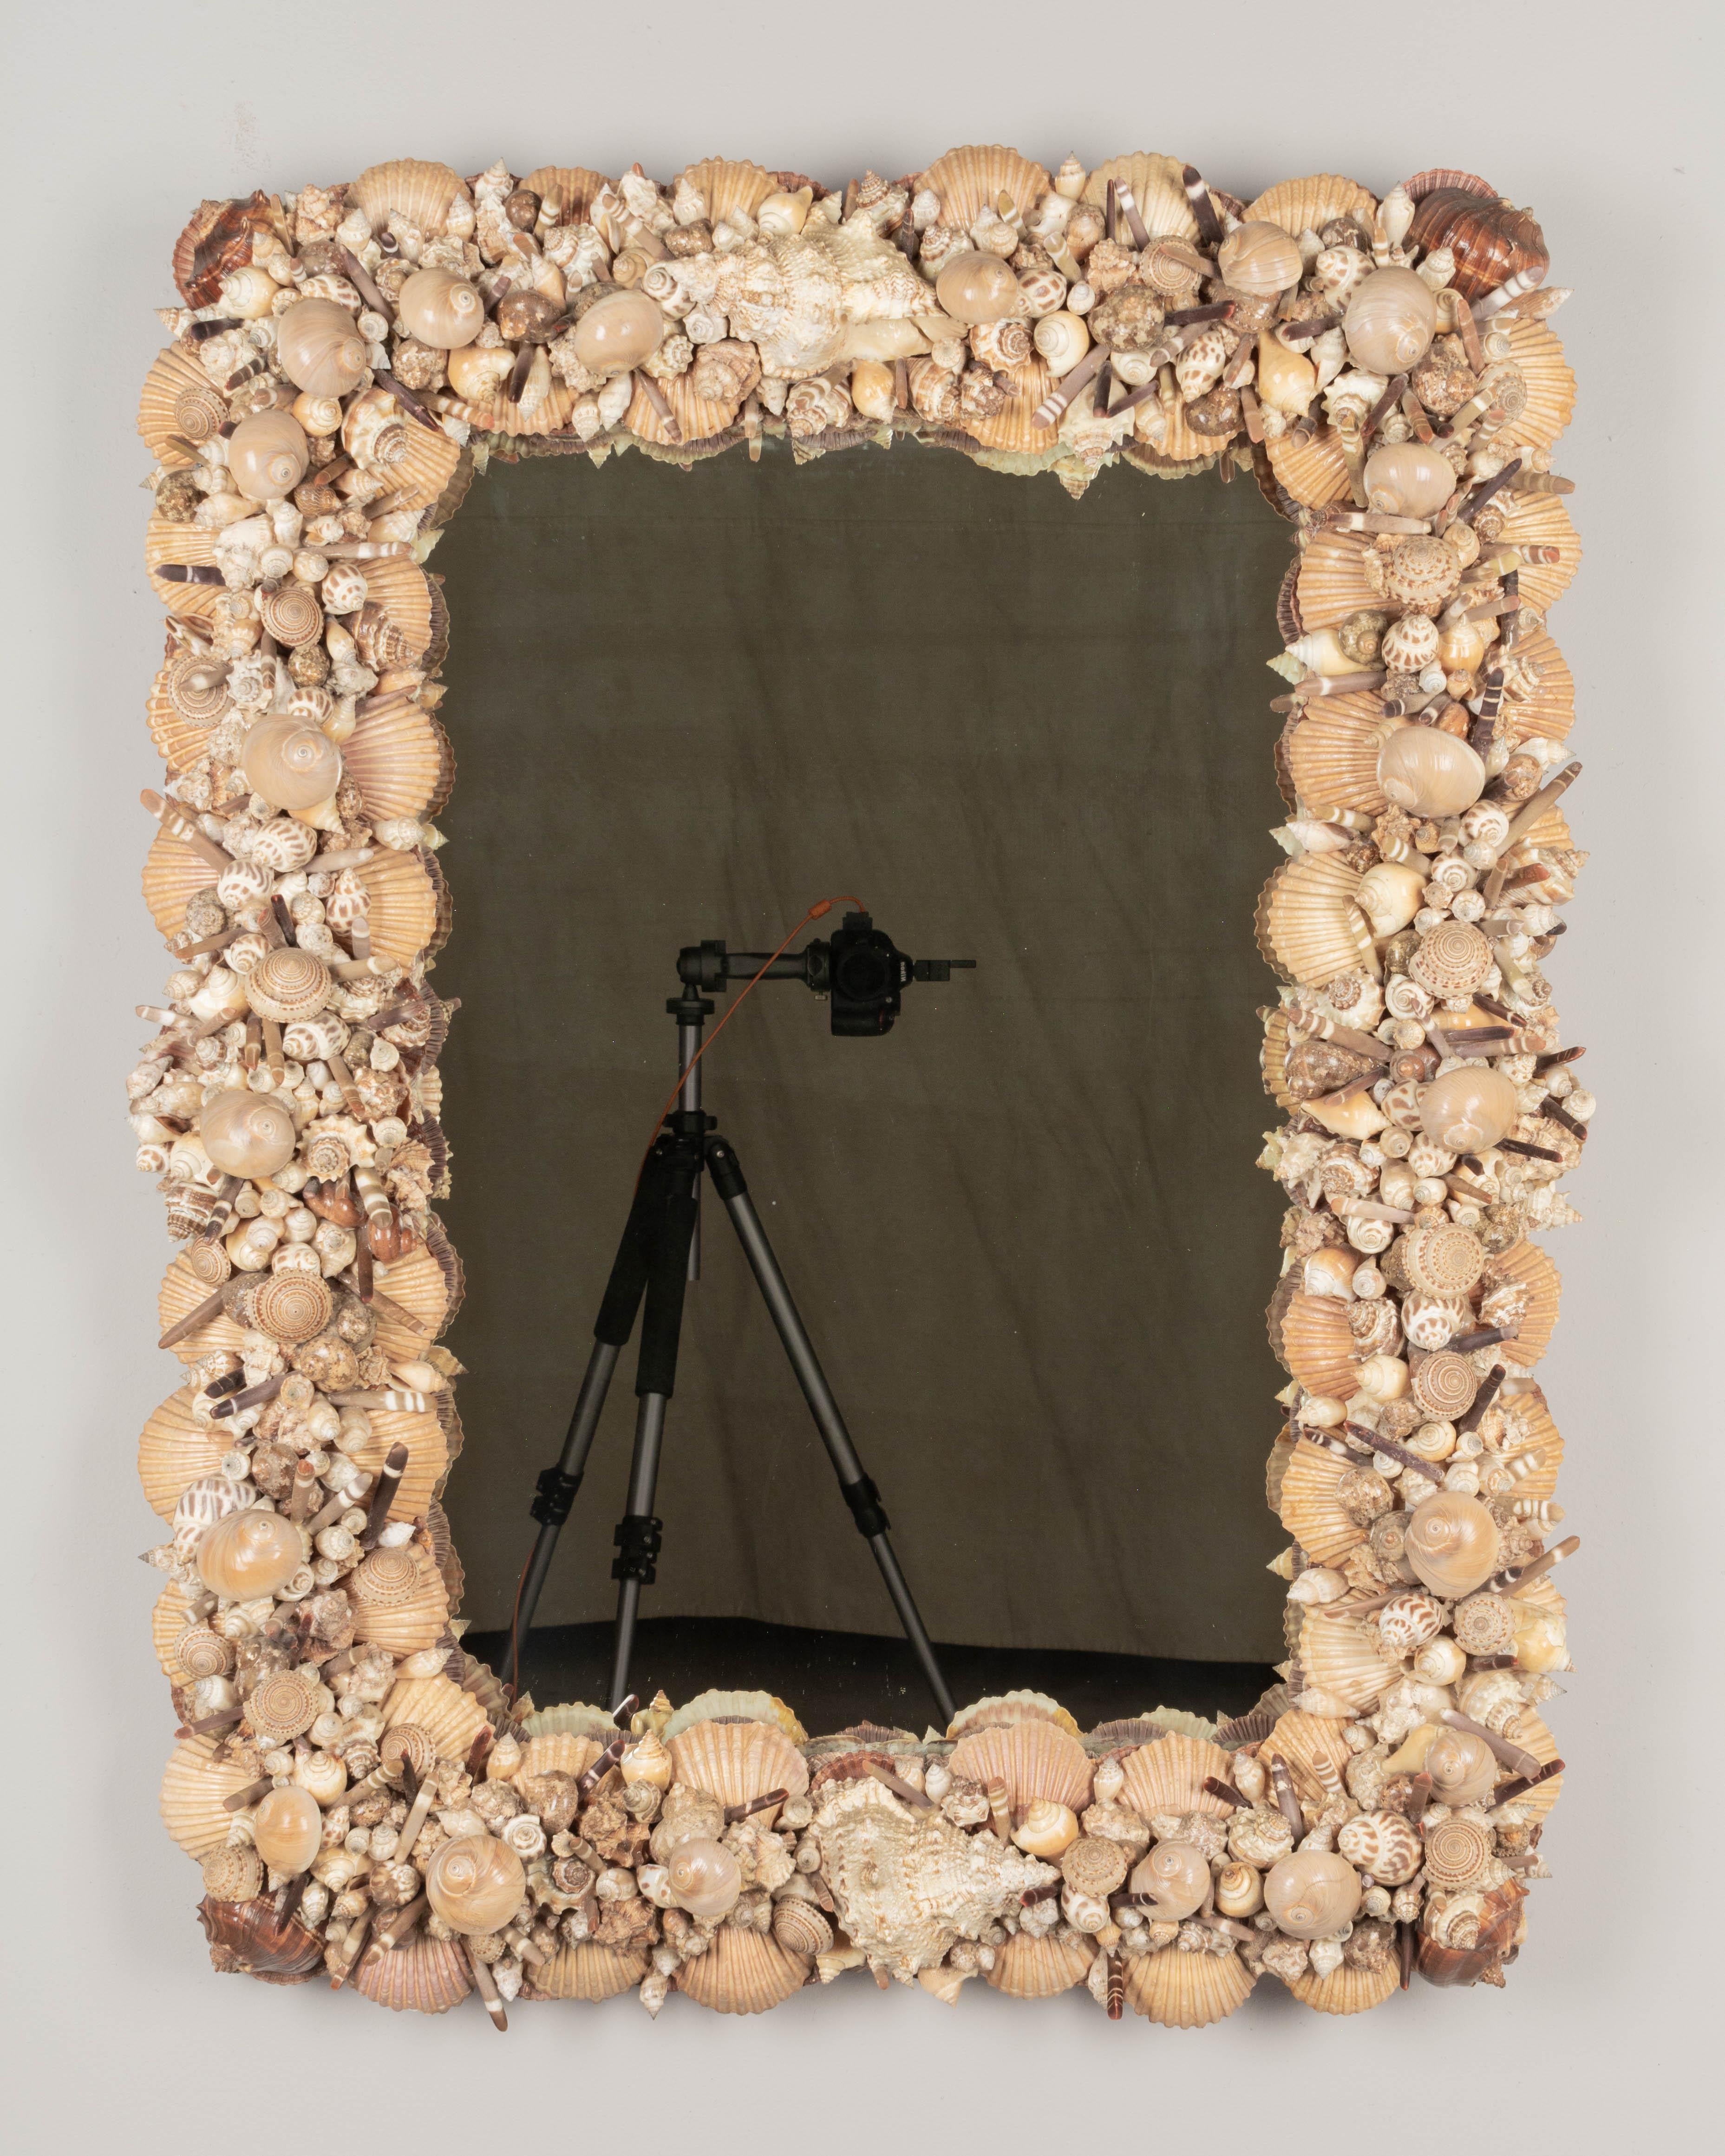 A large Mid Century hand-crafted seashell encrusted wall mirror. Beautiful warm color palette with variety of different shell specimens, including large scallops around the perimeter and two large conch shells at the top and bottom. All arranged in